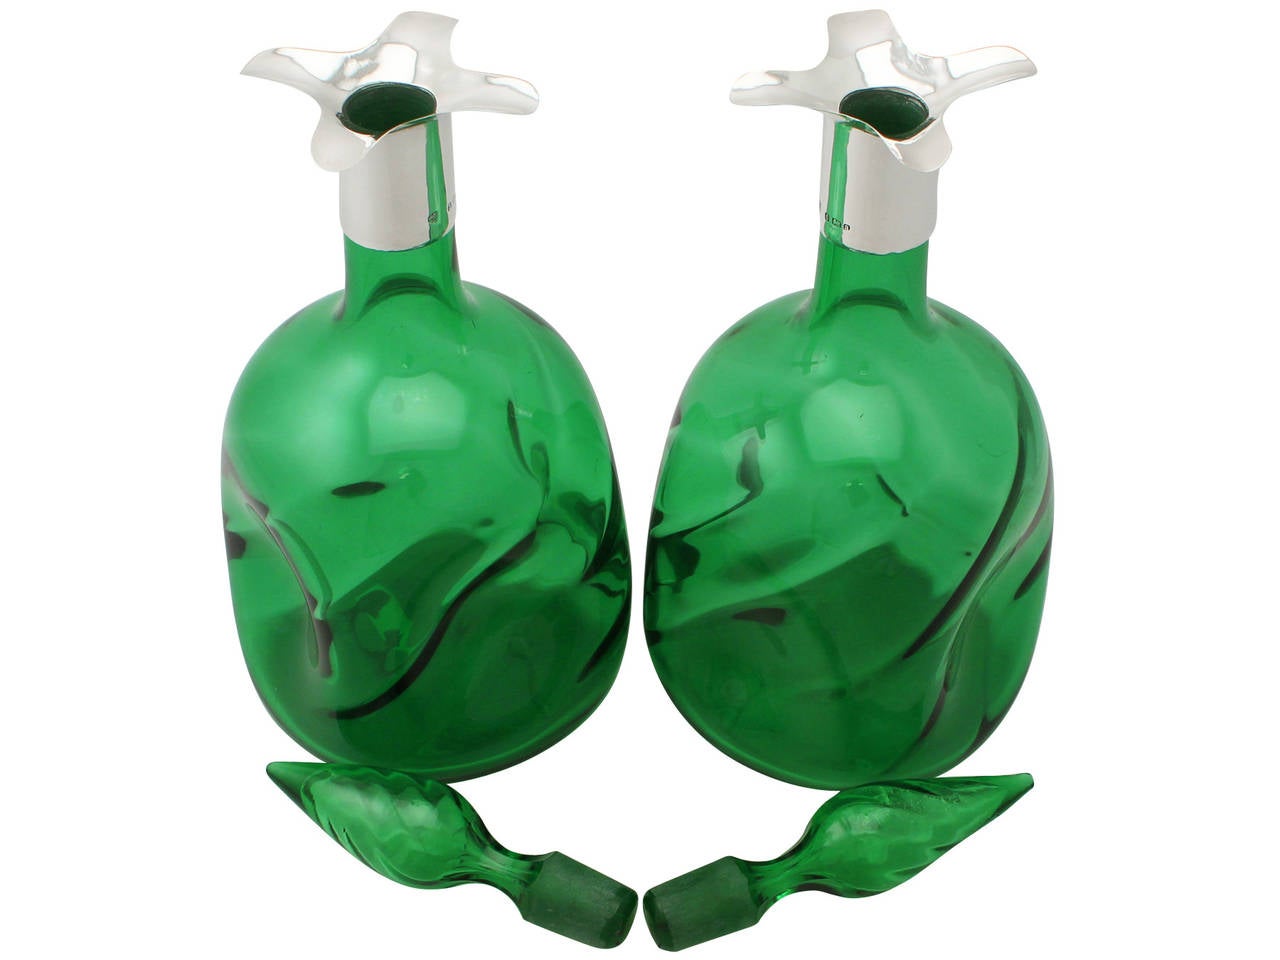 A fine pair of antique Victorian sterling silver and green glass decanters; part of our diverse silver and glassware collection.

These fine antique Victorian green glass decanters have a rounded square shaped form.

The cylindrical neck of each